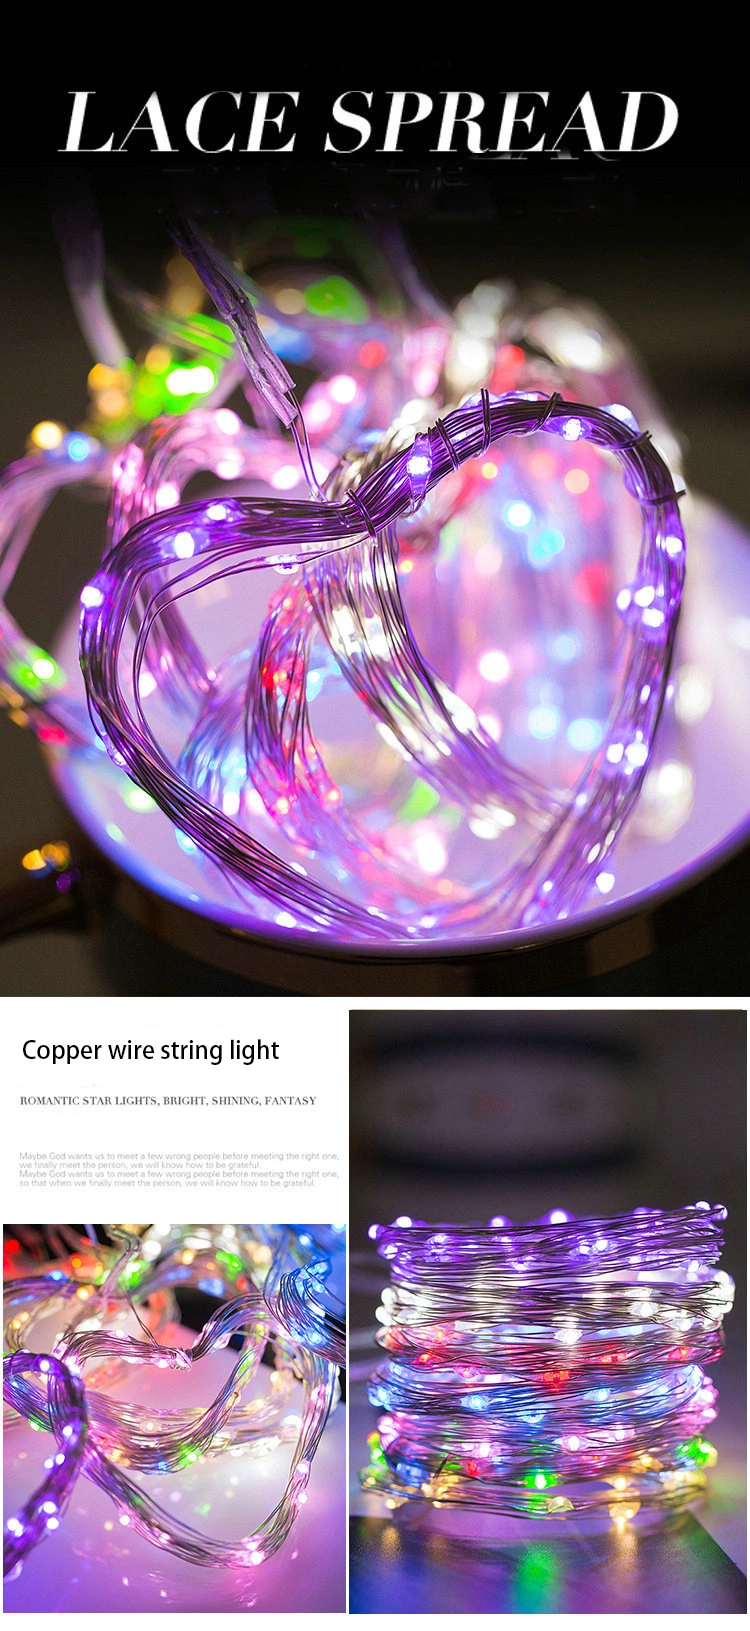 Solar Powered Fairy Lights Outdoor Copper Wire Decoration Christmas Lights Waterproof for Garden Yard Camping Patio Tree Party